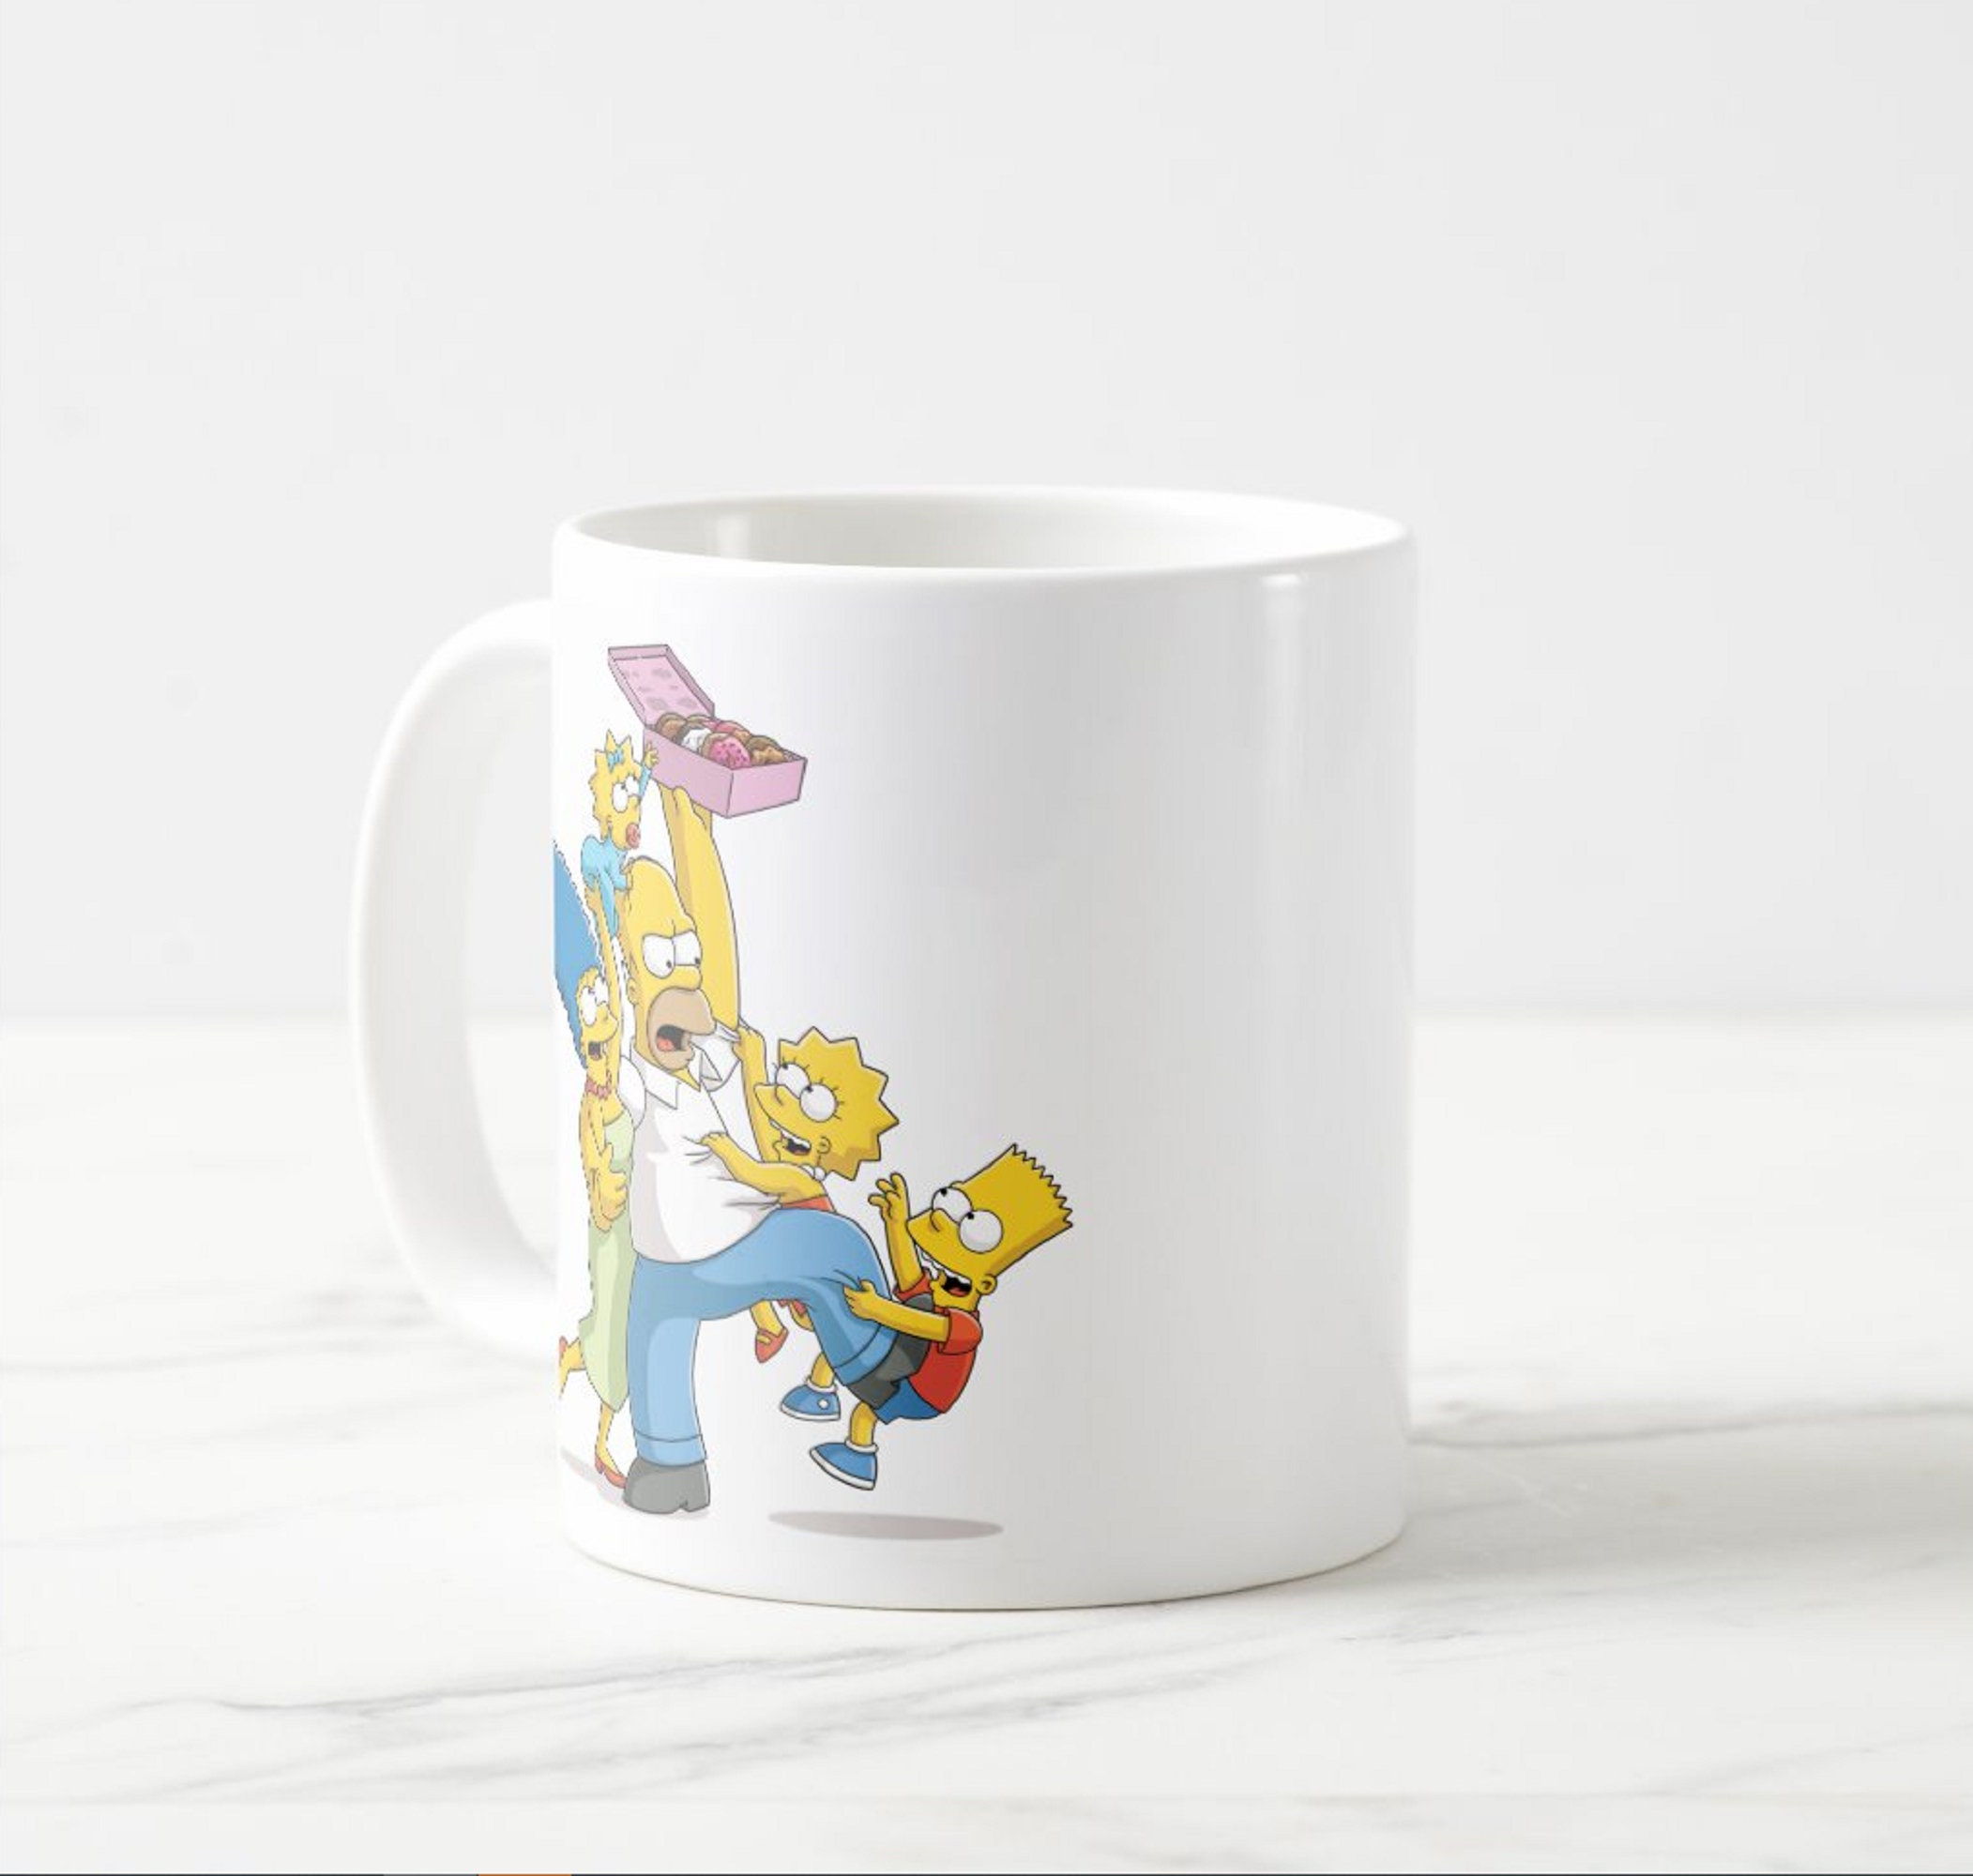 il fullxfull.2179712880 jumg 1 - The Simpsons Shop